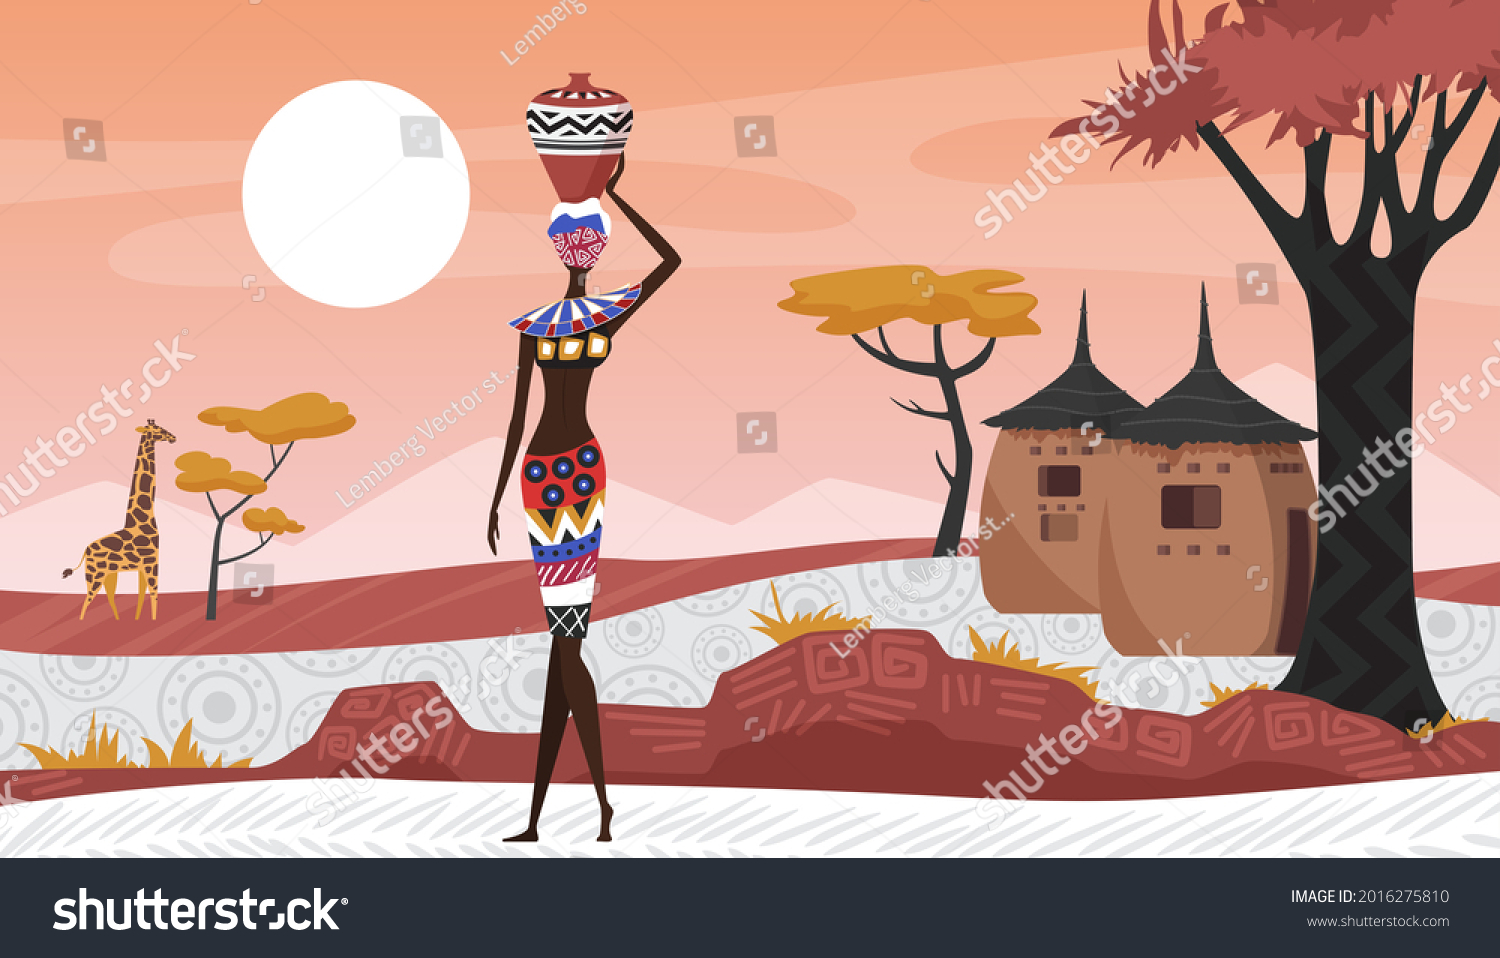 SVG of Africa rural landscape with abstract geometric pattern, village and African people vector illustration. Cartoon woman with jug, afro character in tribal traditional costume near houses huts background svg